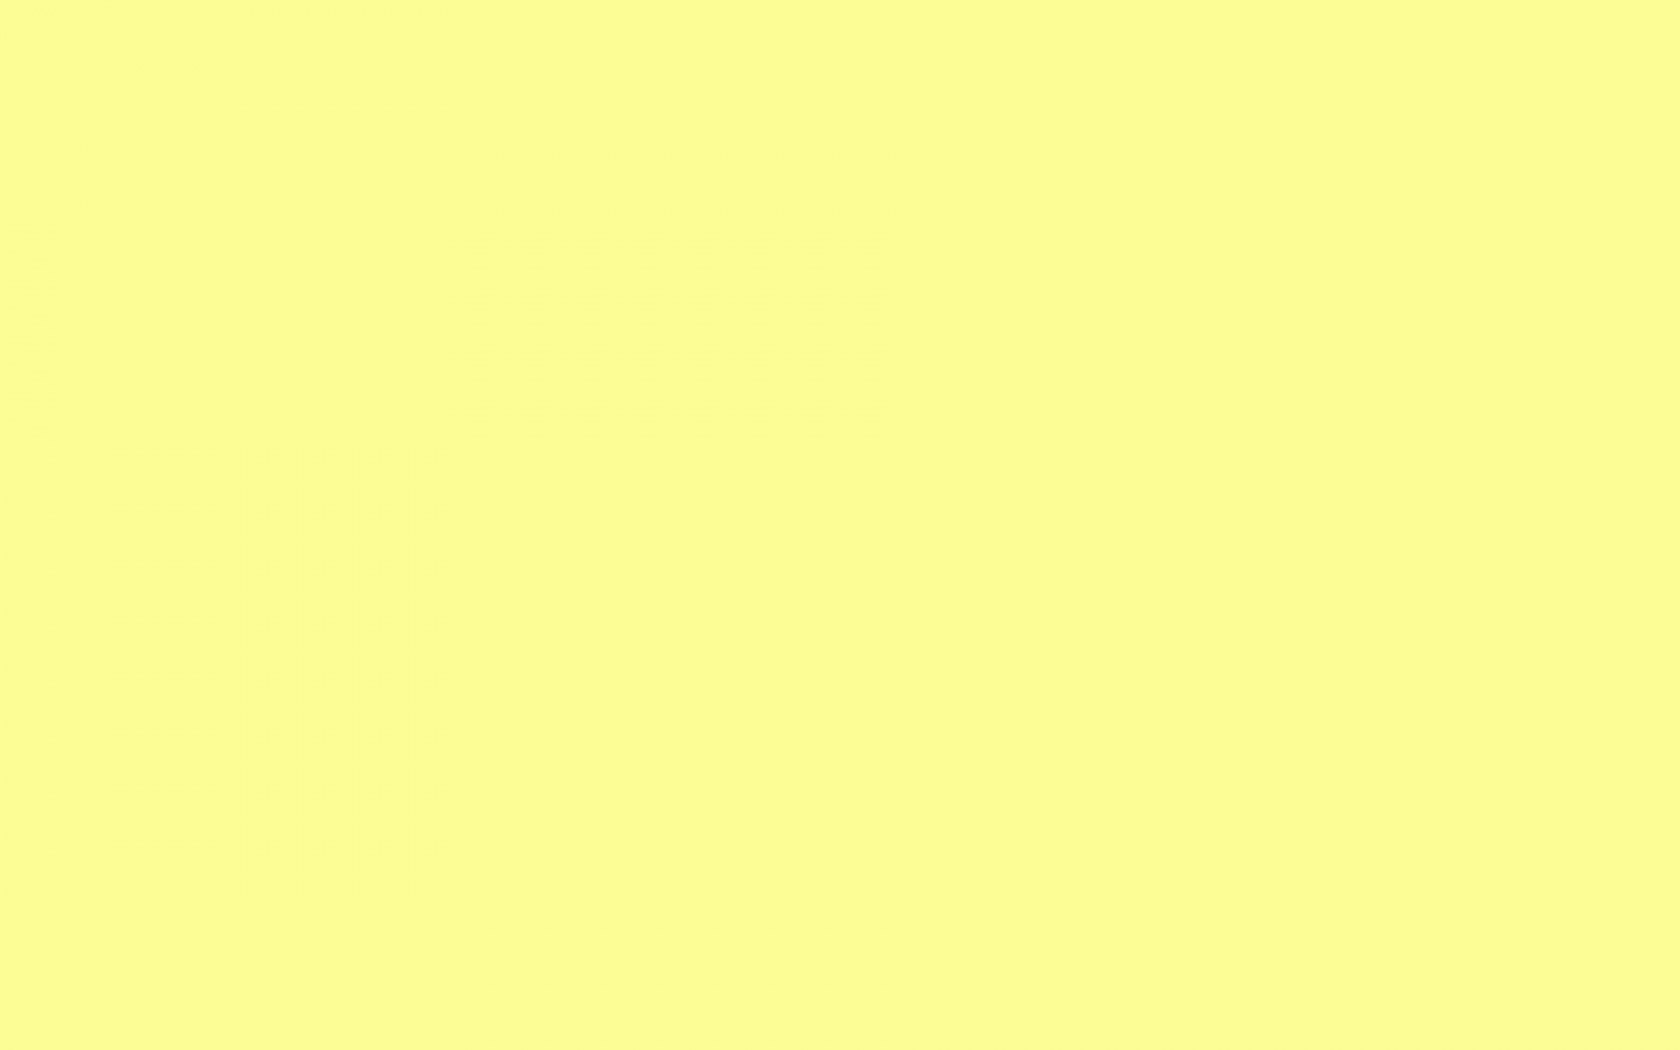 Solid Pastel Yellow Background